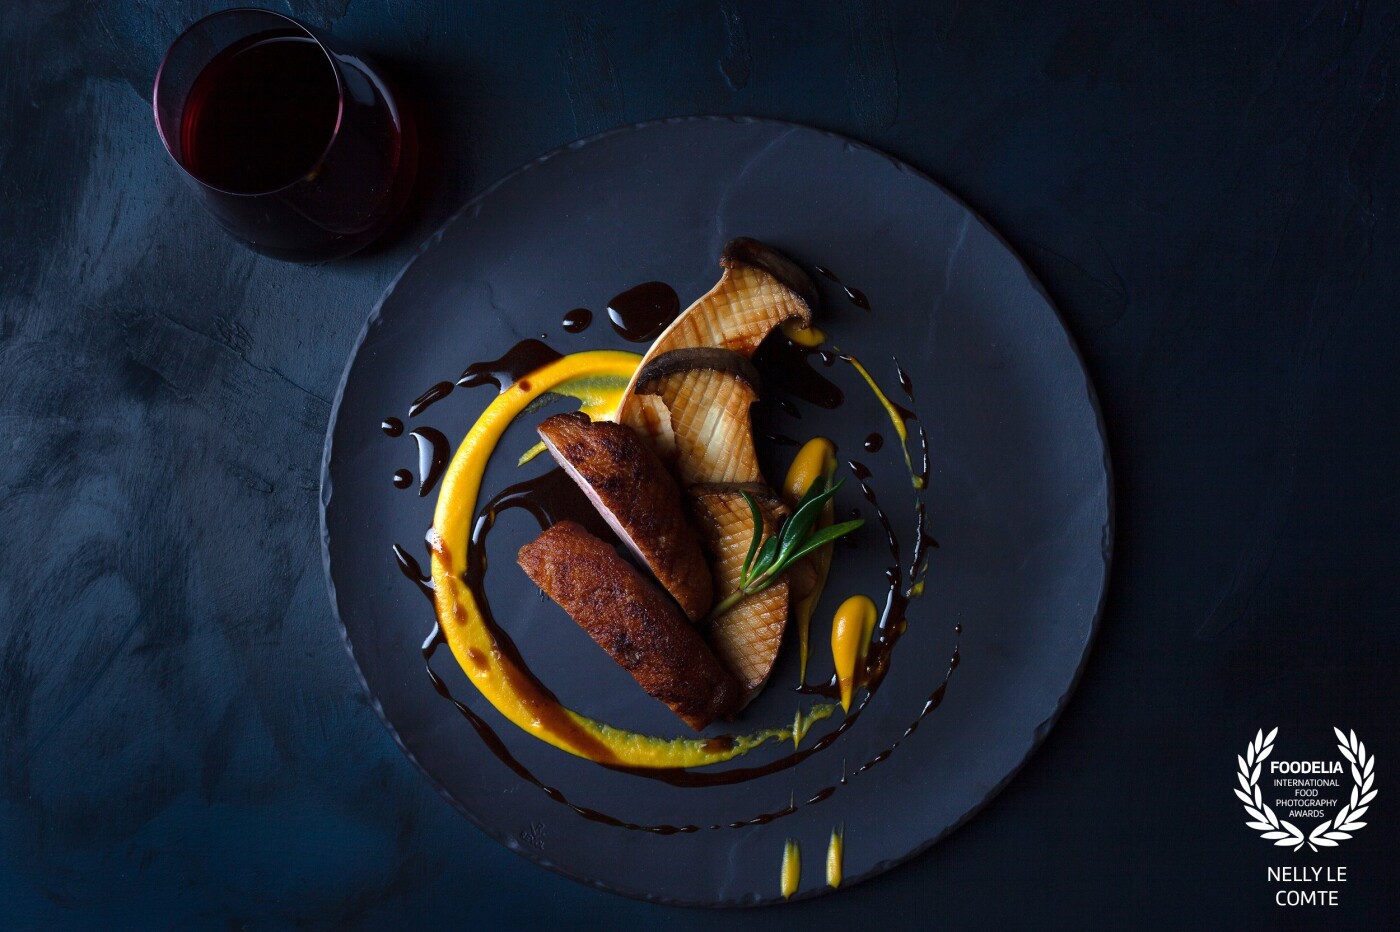 Enhancing the colours of the mushroom and duck breast with the dark plate and the dark handmade background. The chef's plating @jordanstaniford with the ochre tones of the dressing brings an artful display to the food. Restaurant photoshoot on location @crystalbrookbyron